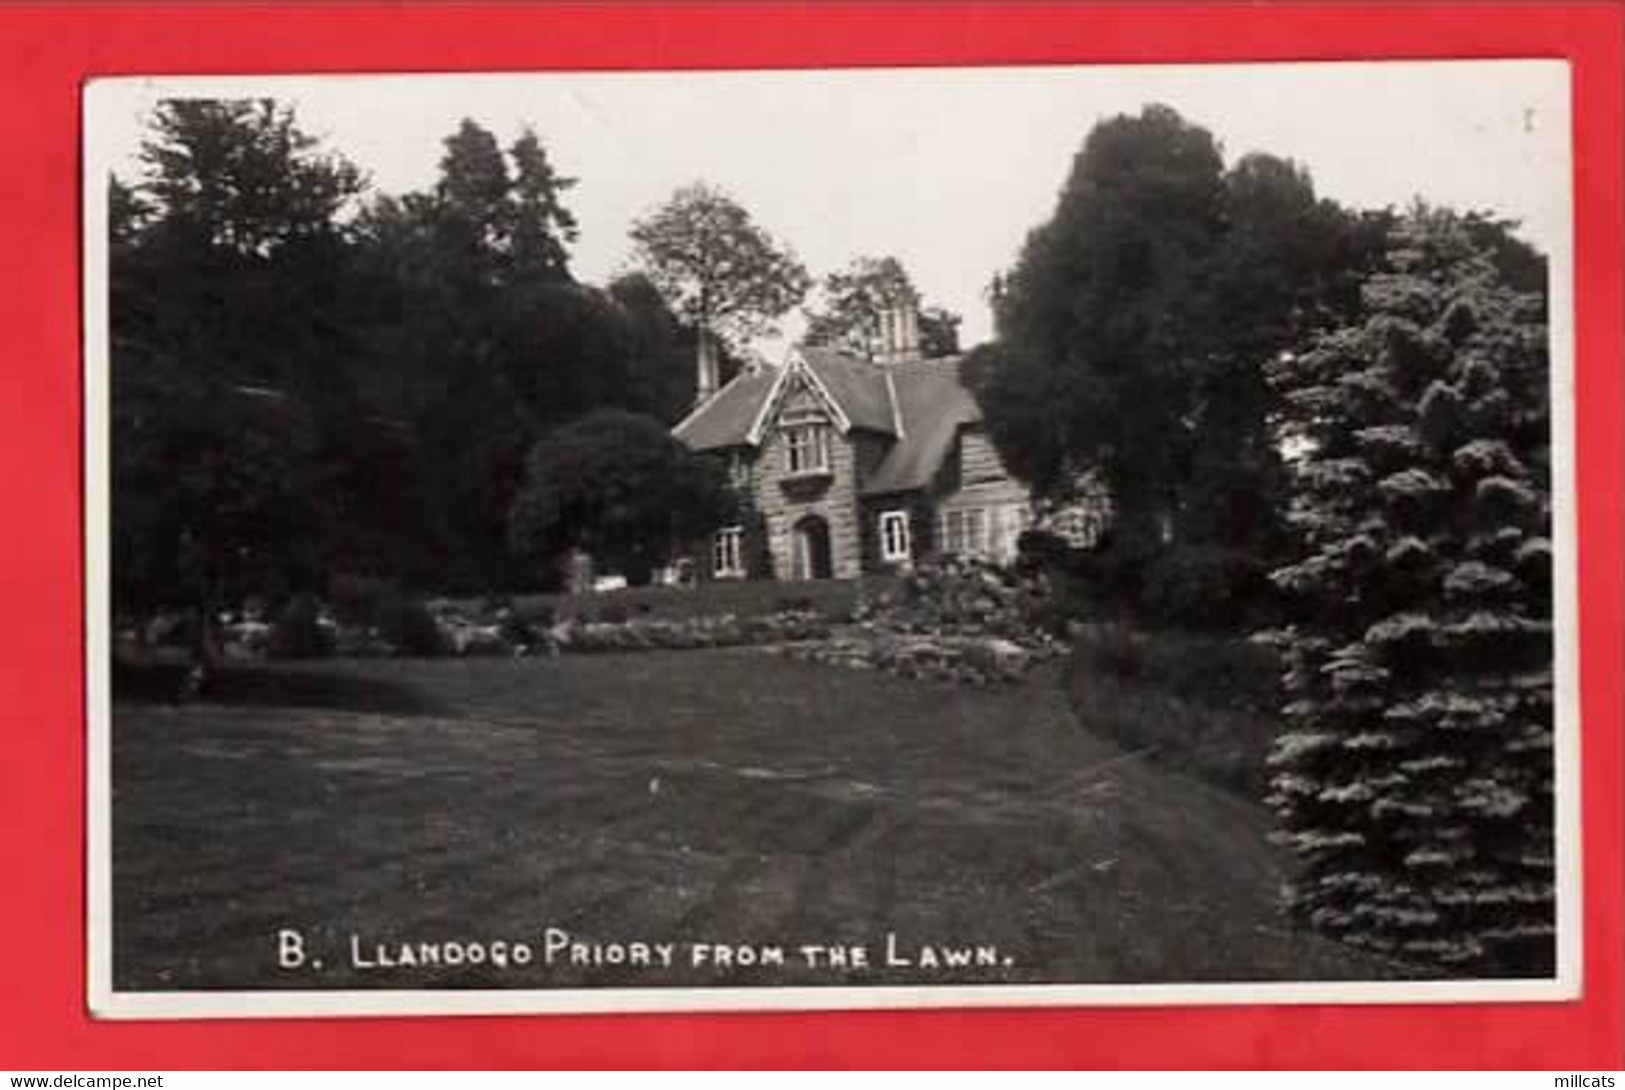 LLANDOGO    PRIORY FROM THE LAWN   RP  Pu 1932 - Monmouthshire